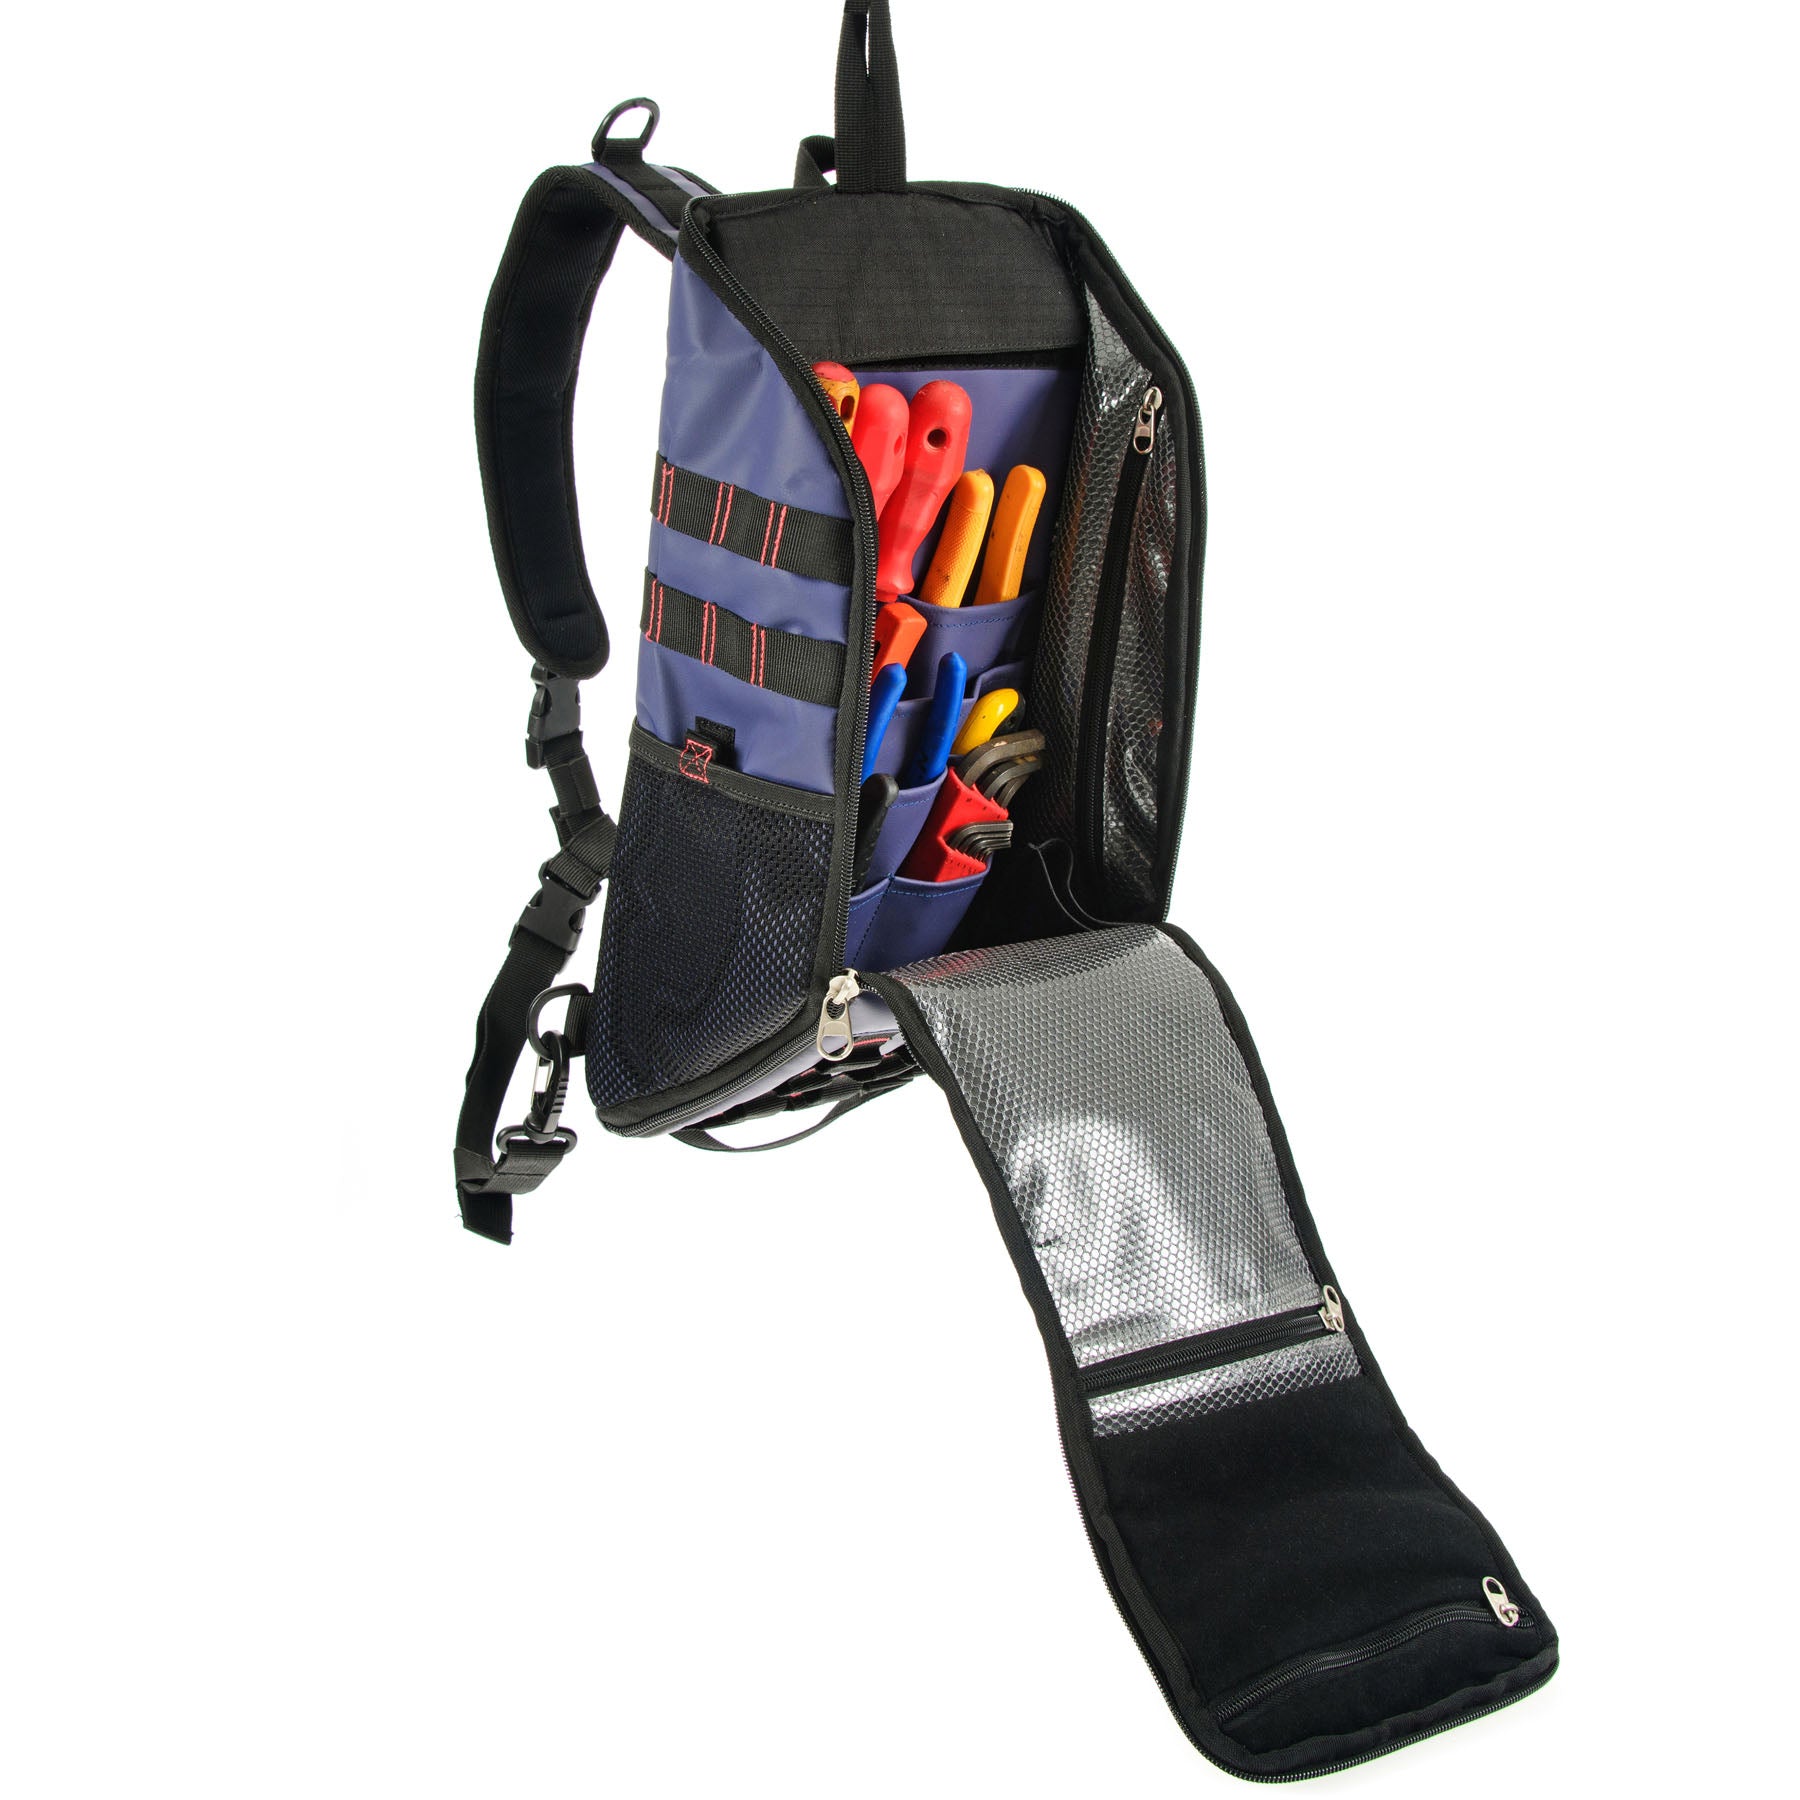 The Sling Hydration Tool Bag